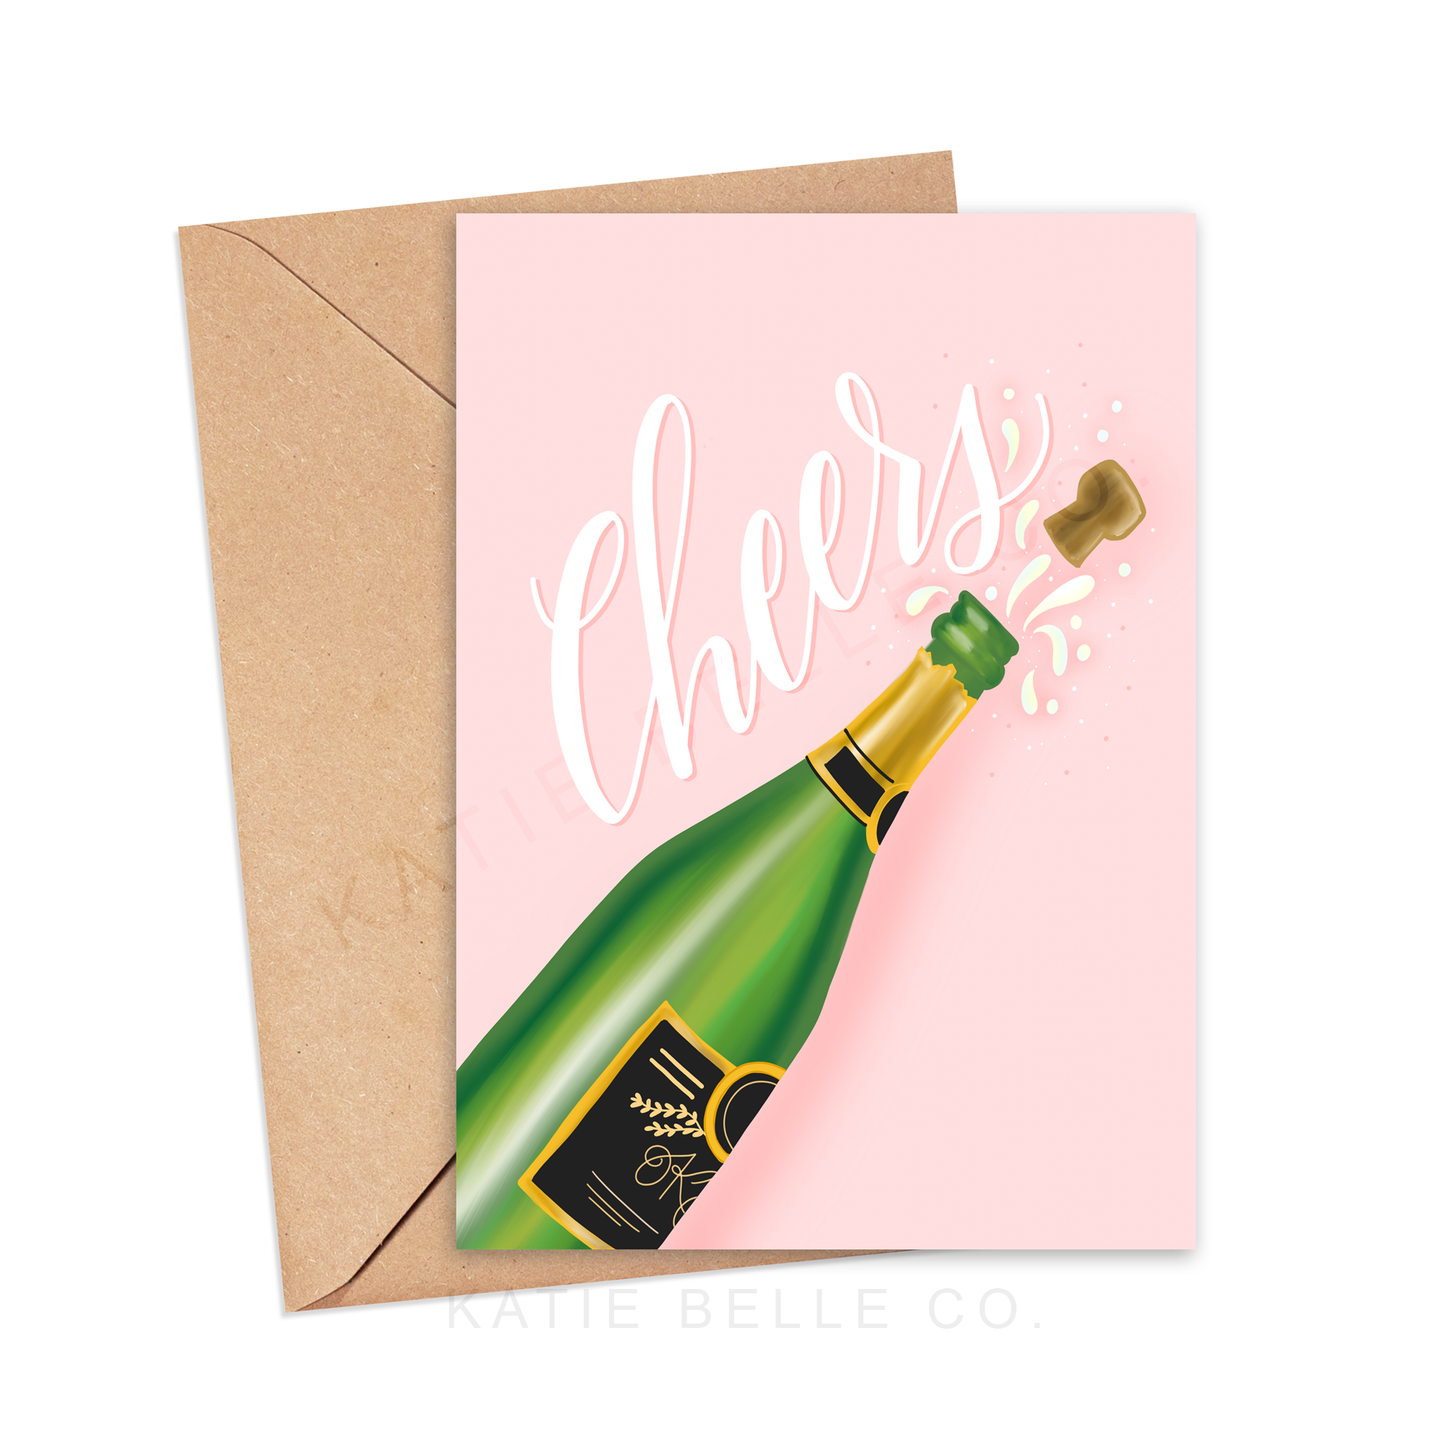 Cheers, cheers greeting card, celebration greeting card, popping champagne bottle. katie belle co. congratulations greeting card